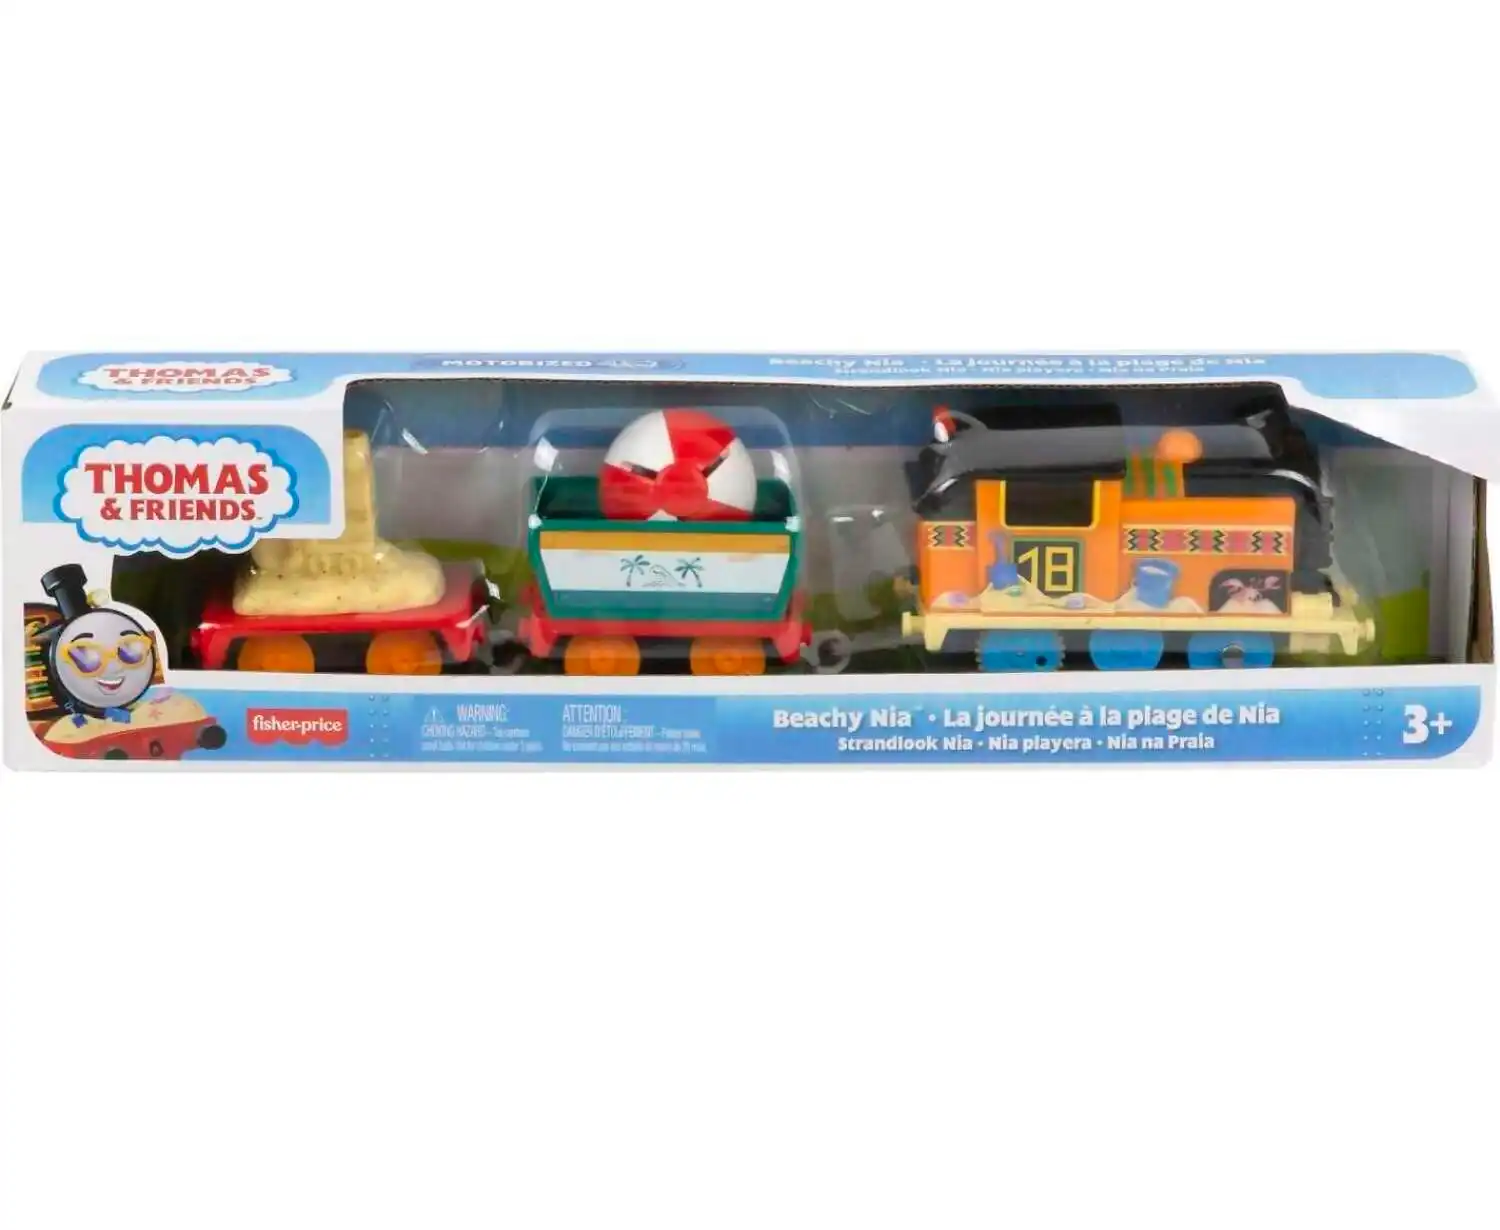 Fisher-price - Thomas And Friends Beachy Nia Toy Train Motorized Engine With Cargo Preschool Toys